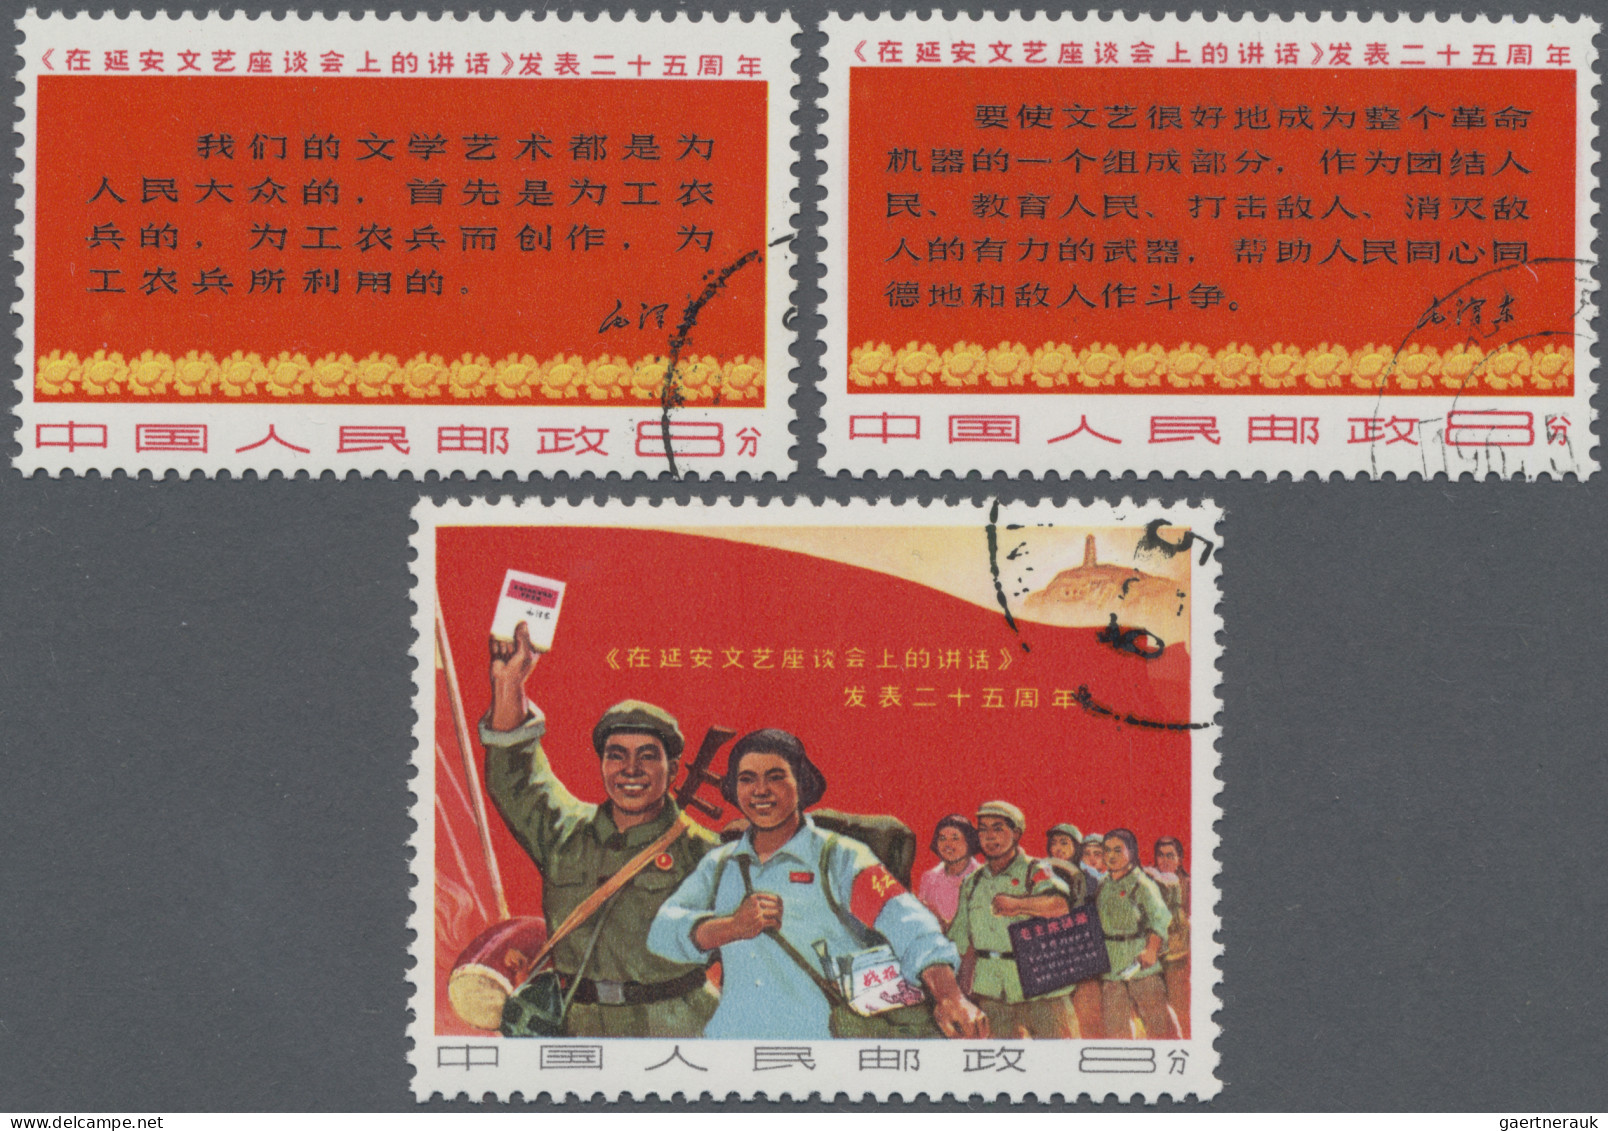 China (PRC): 1967, Yenan Forum Set (W3), Cto Used With Full Gum (Michel €500) - Covers & Documents